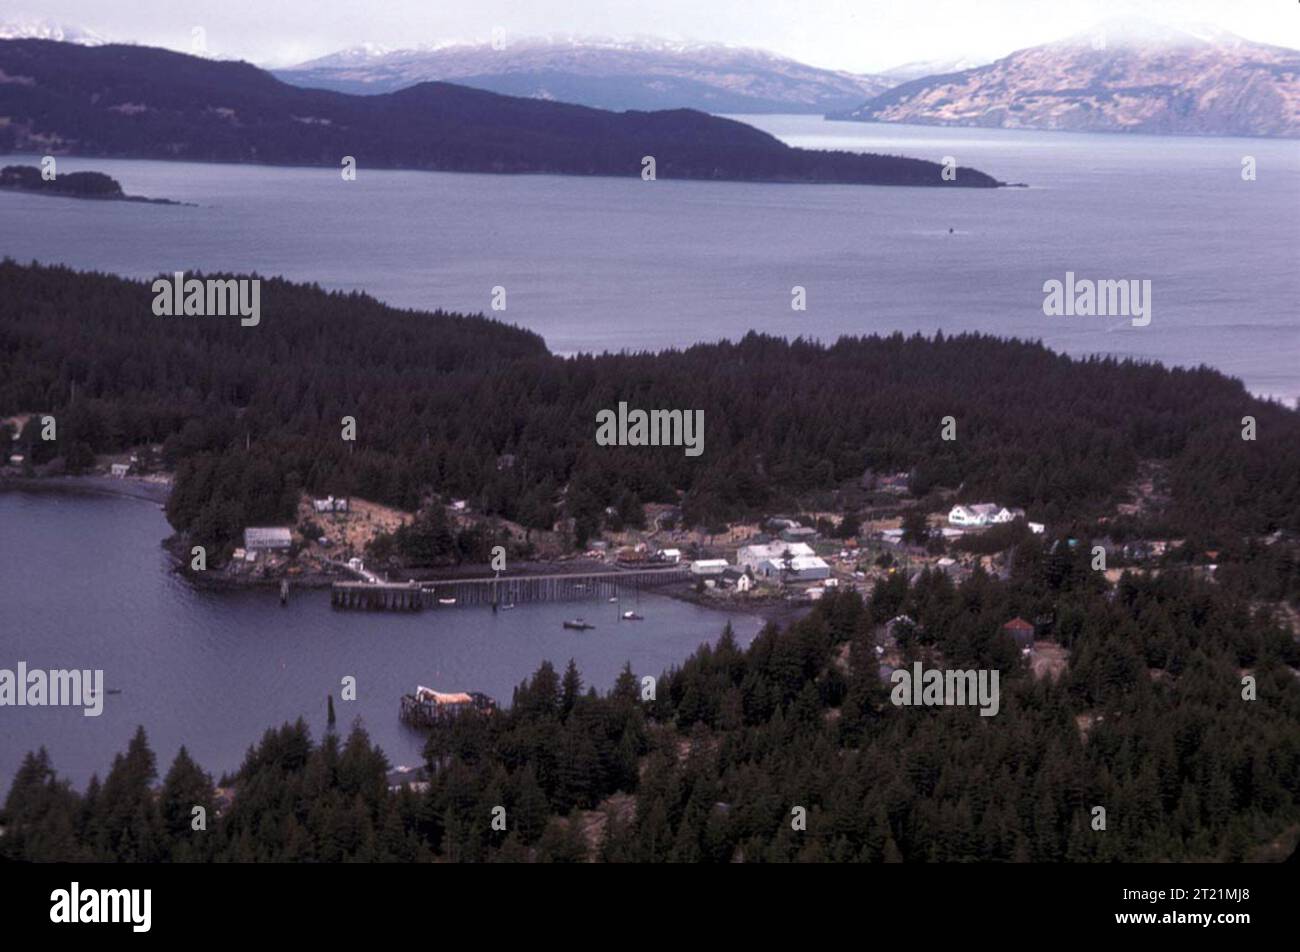 Ouzinkie is located on the west coast of Spruce Island, adjacent to Kodiak Island. It lies northwest of the City of Kodiak and 247 air miles southwest of Anchorage. Subjects: Villages; Villagess; Aerial photography photography; Alaska.  . 1998 - 2011. Stock Photo